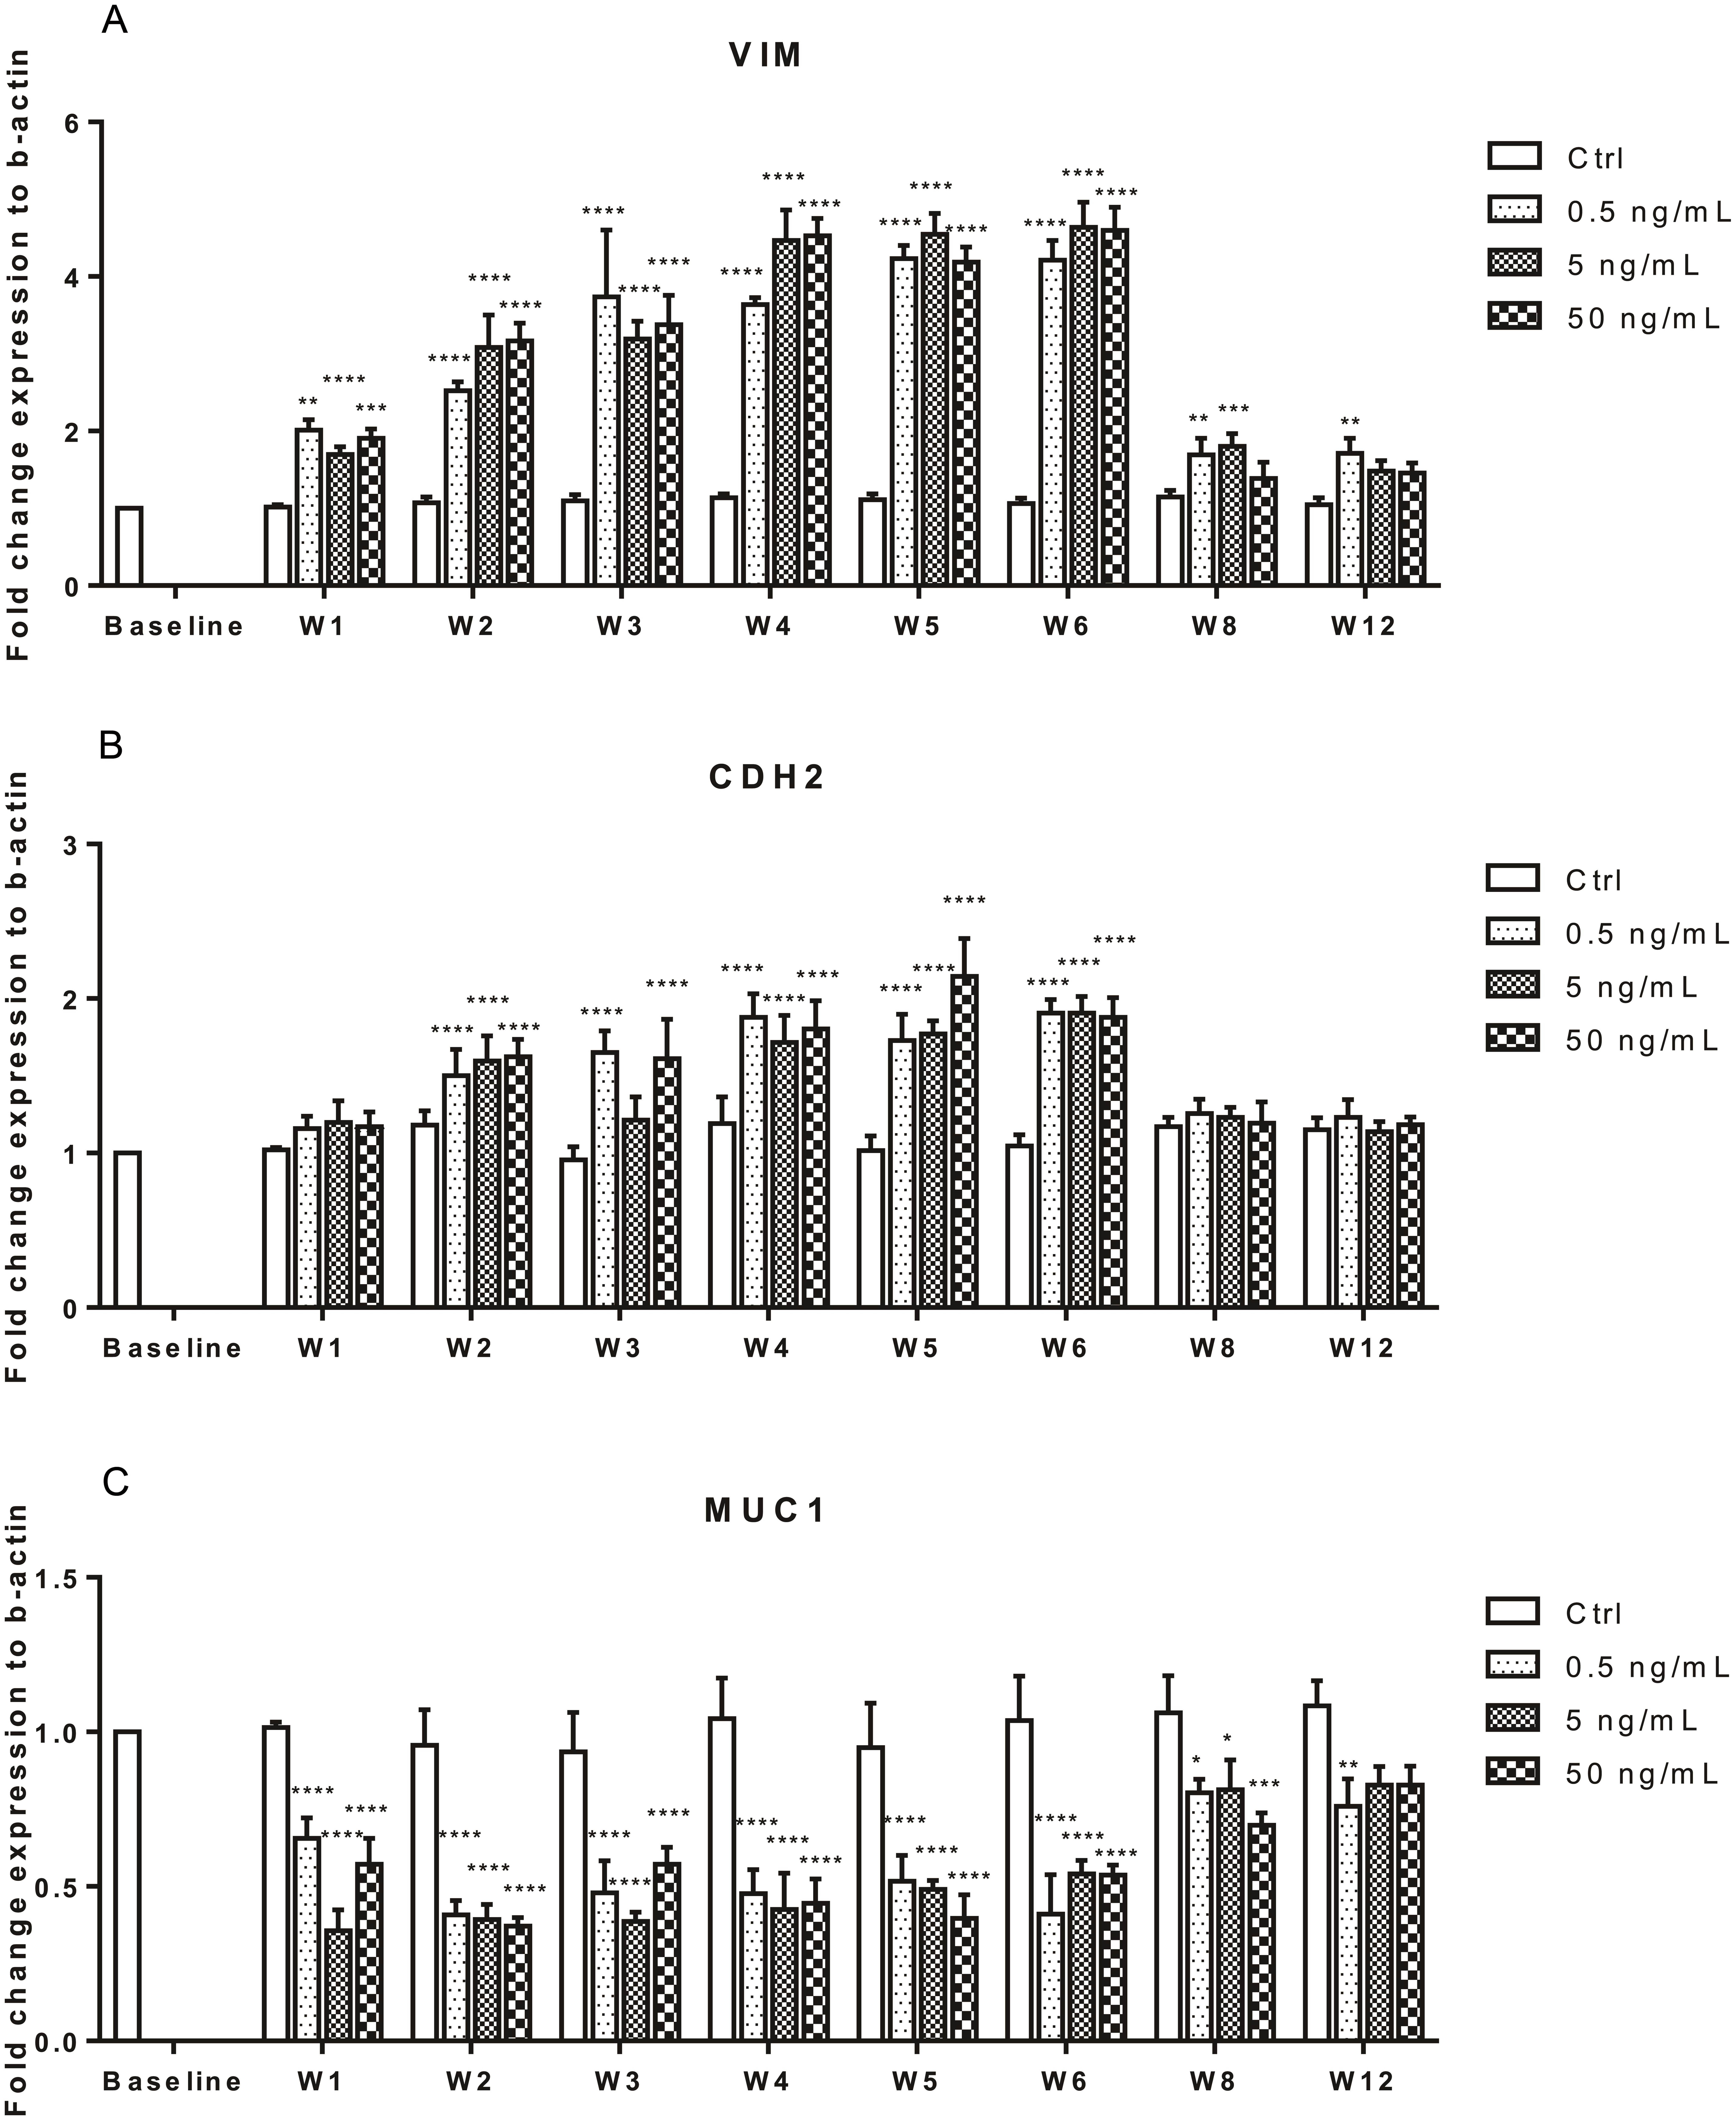 Effects of FGF19 exposure on H69 cholangiocyte EMT as reflected by vimentin (A), CDH2 (B) and MUC1 (C) expression.